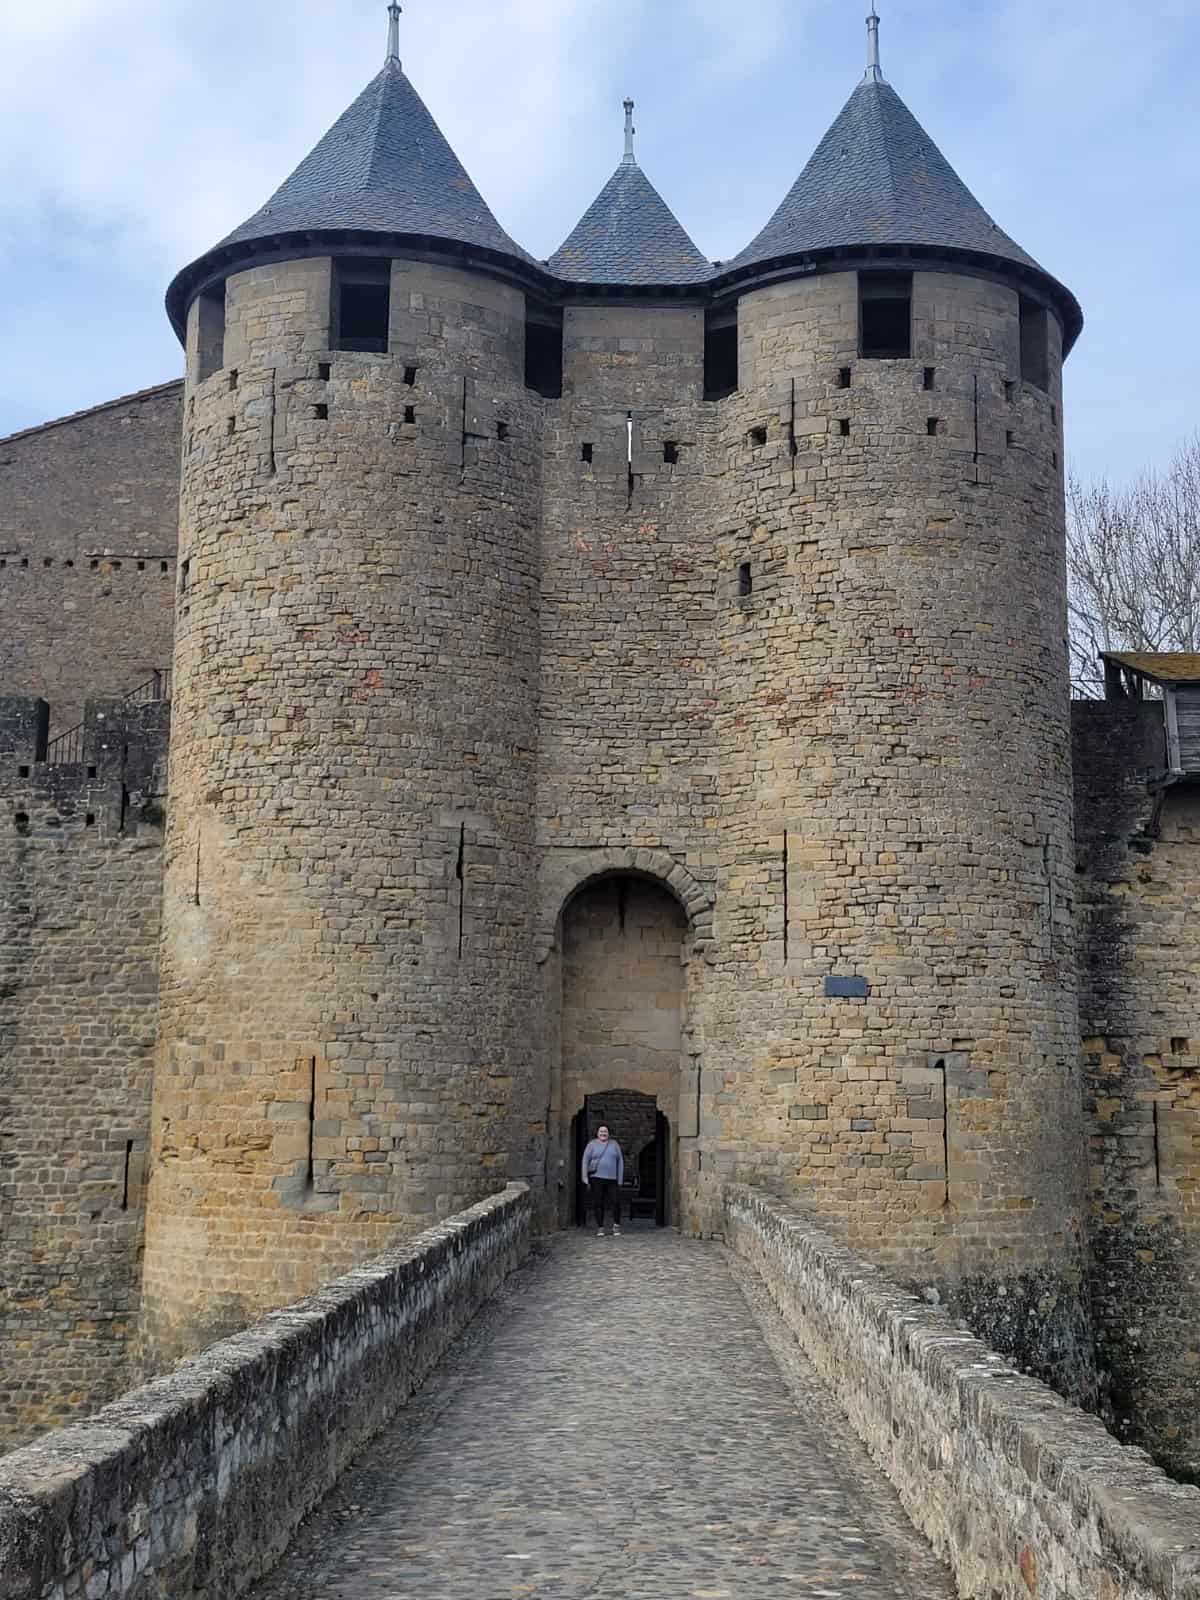 Riana standing in front of the castle doors in Carcassonne on a Toulouse to Carcassonne Day Trip